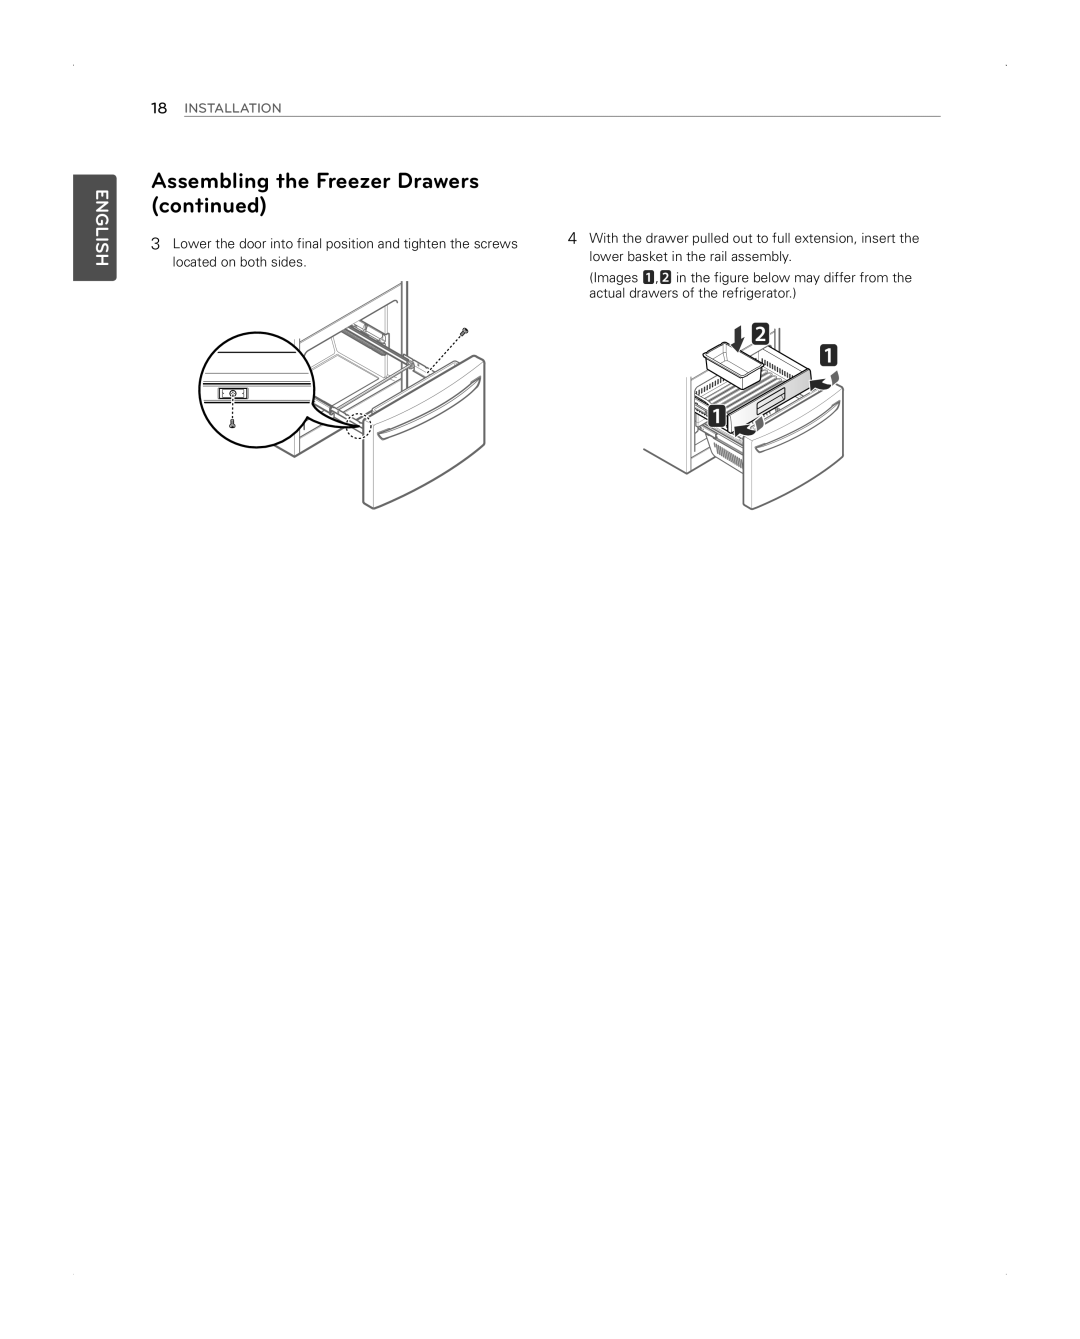 LG Electronics LFX31945ST owner manual Assembling the Freezer Drawers continued, English, Installation 